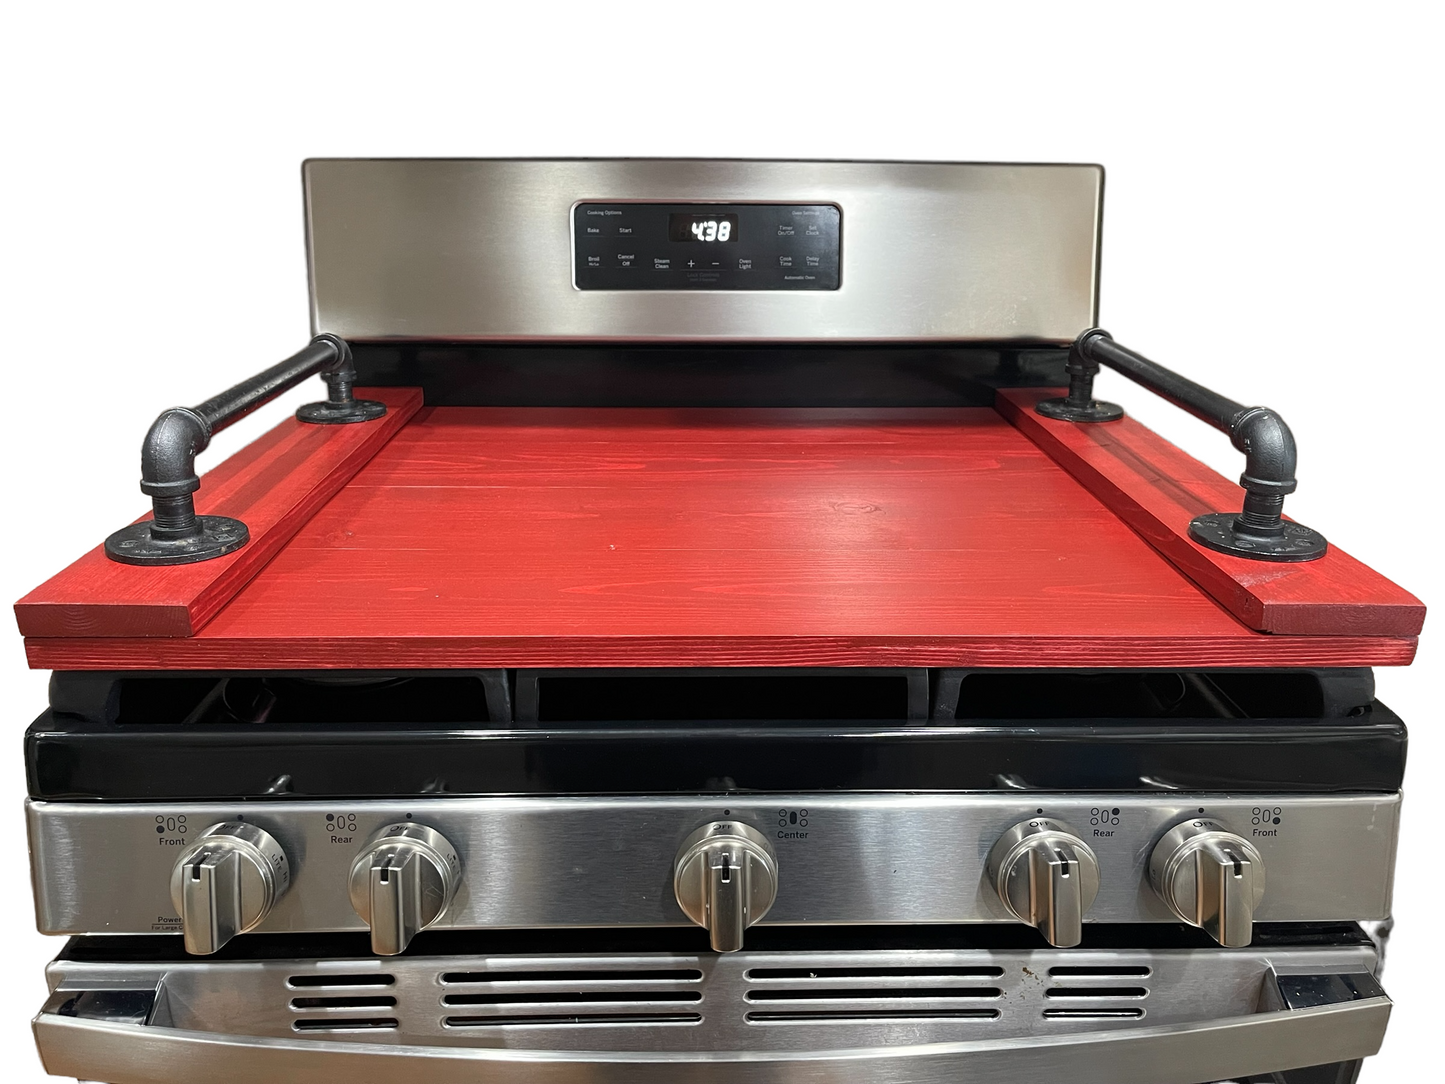 Handmade Industrial Farmhouse Stove Top Cover Noodle Board / Serving Tray Barn Red with Pipe Handles